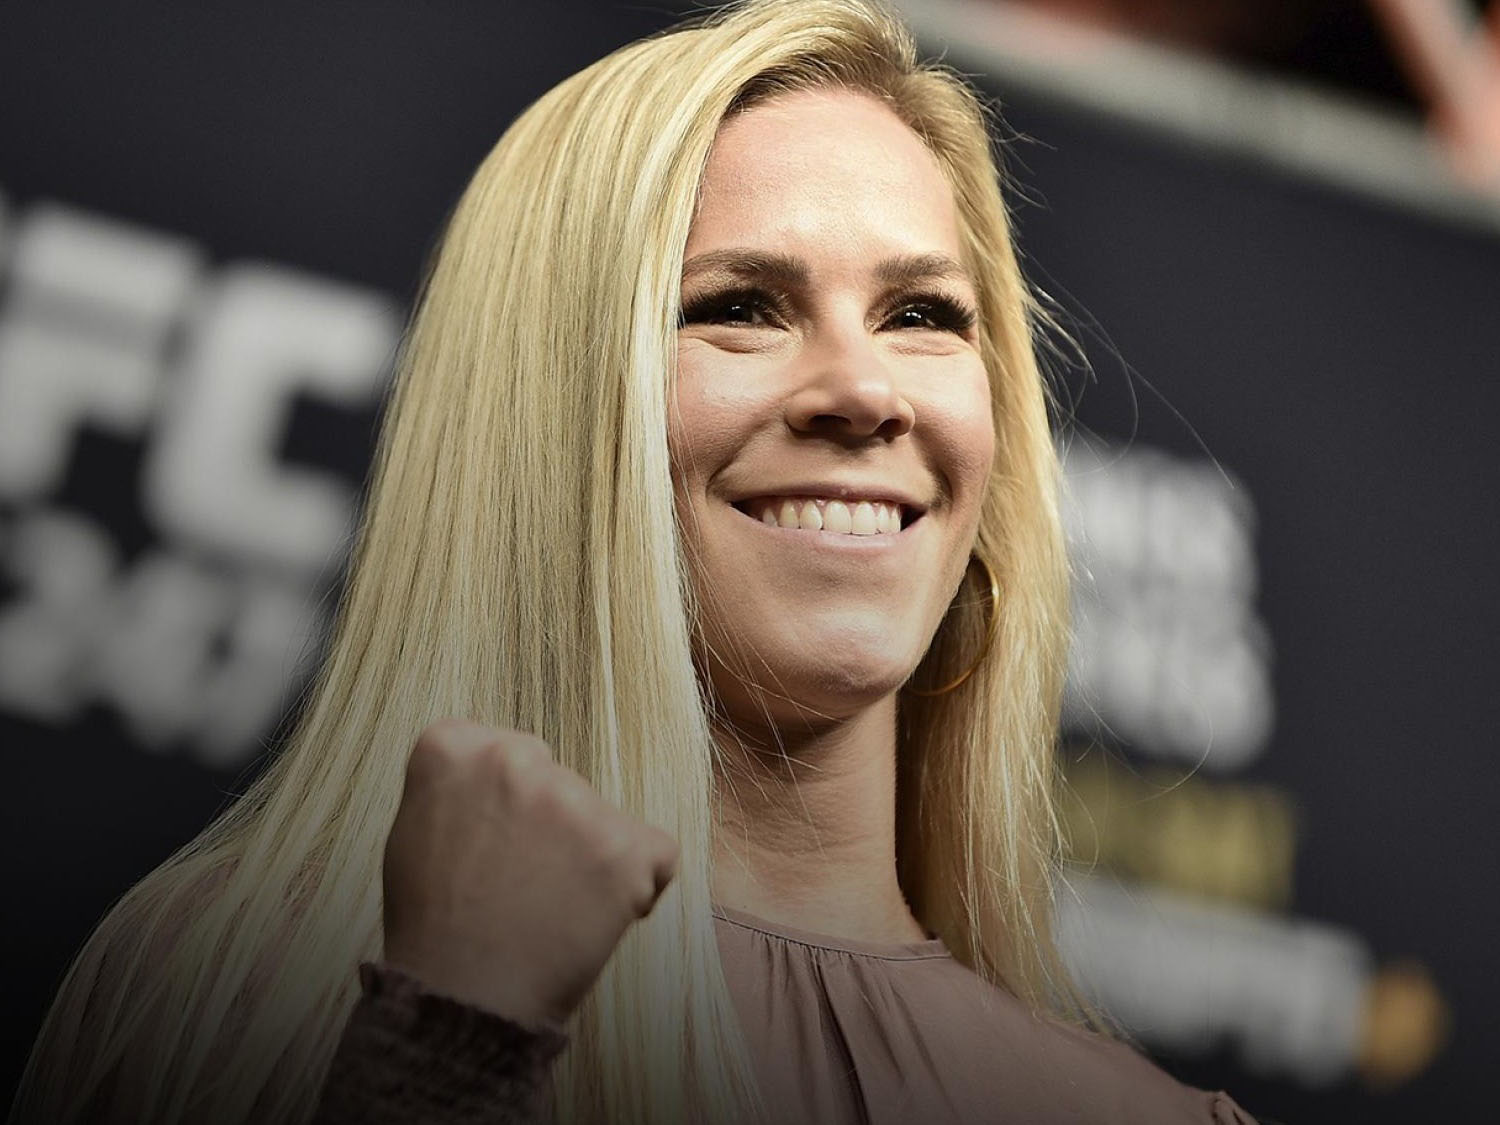 Katlyn Chookagian (Armenian: ?????? ?????????; born December 28, 1988) is an American mixed martial artist who has competed in the bantamweight divisi...